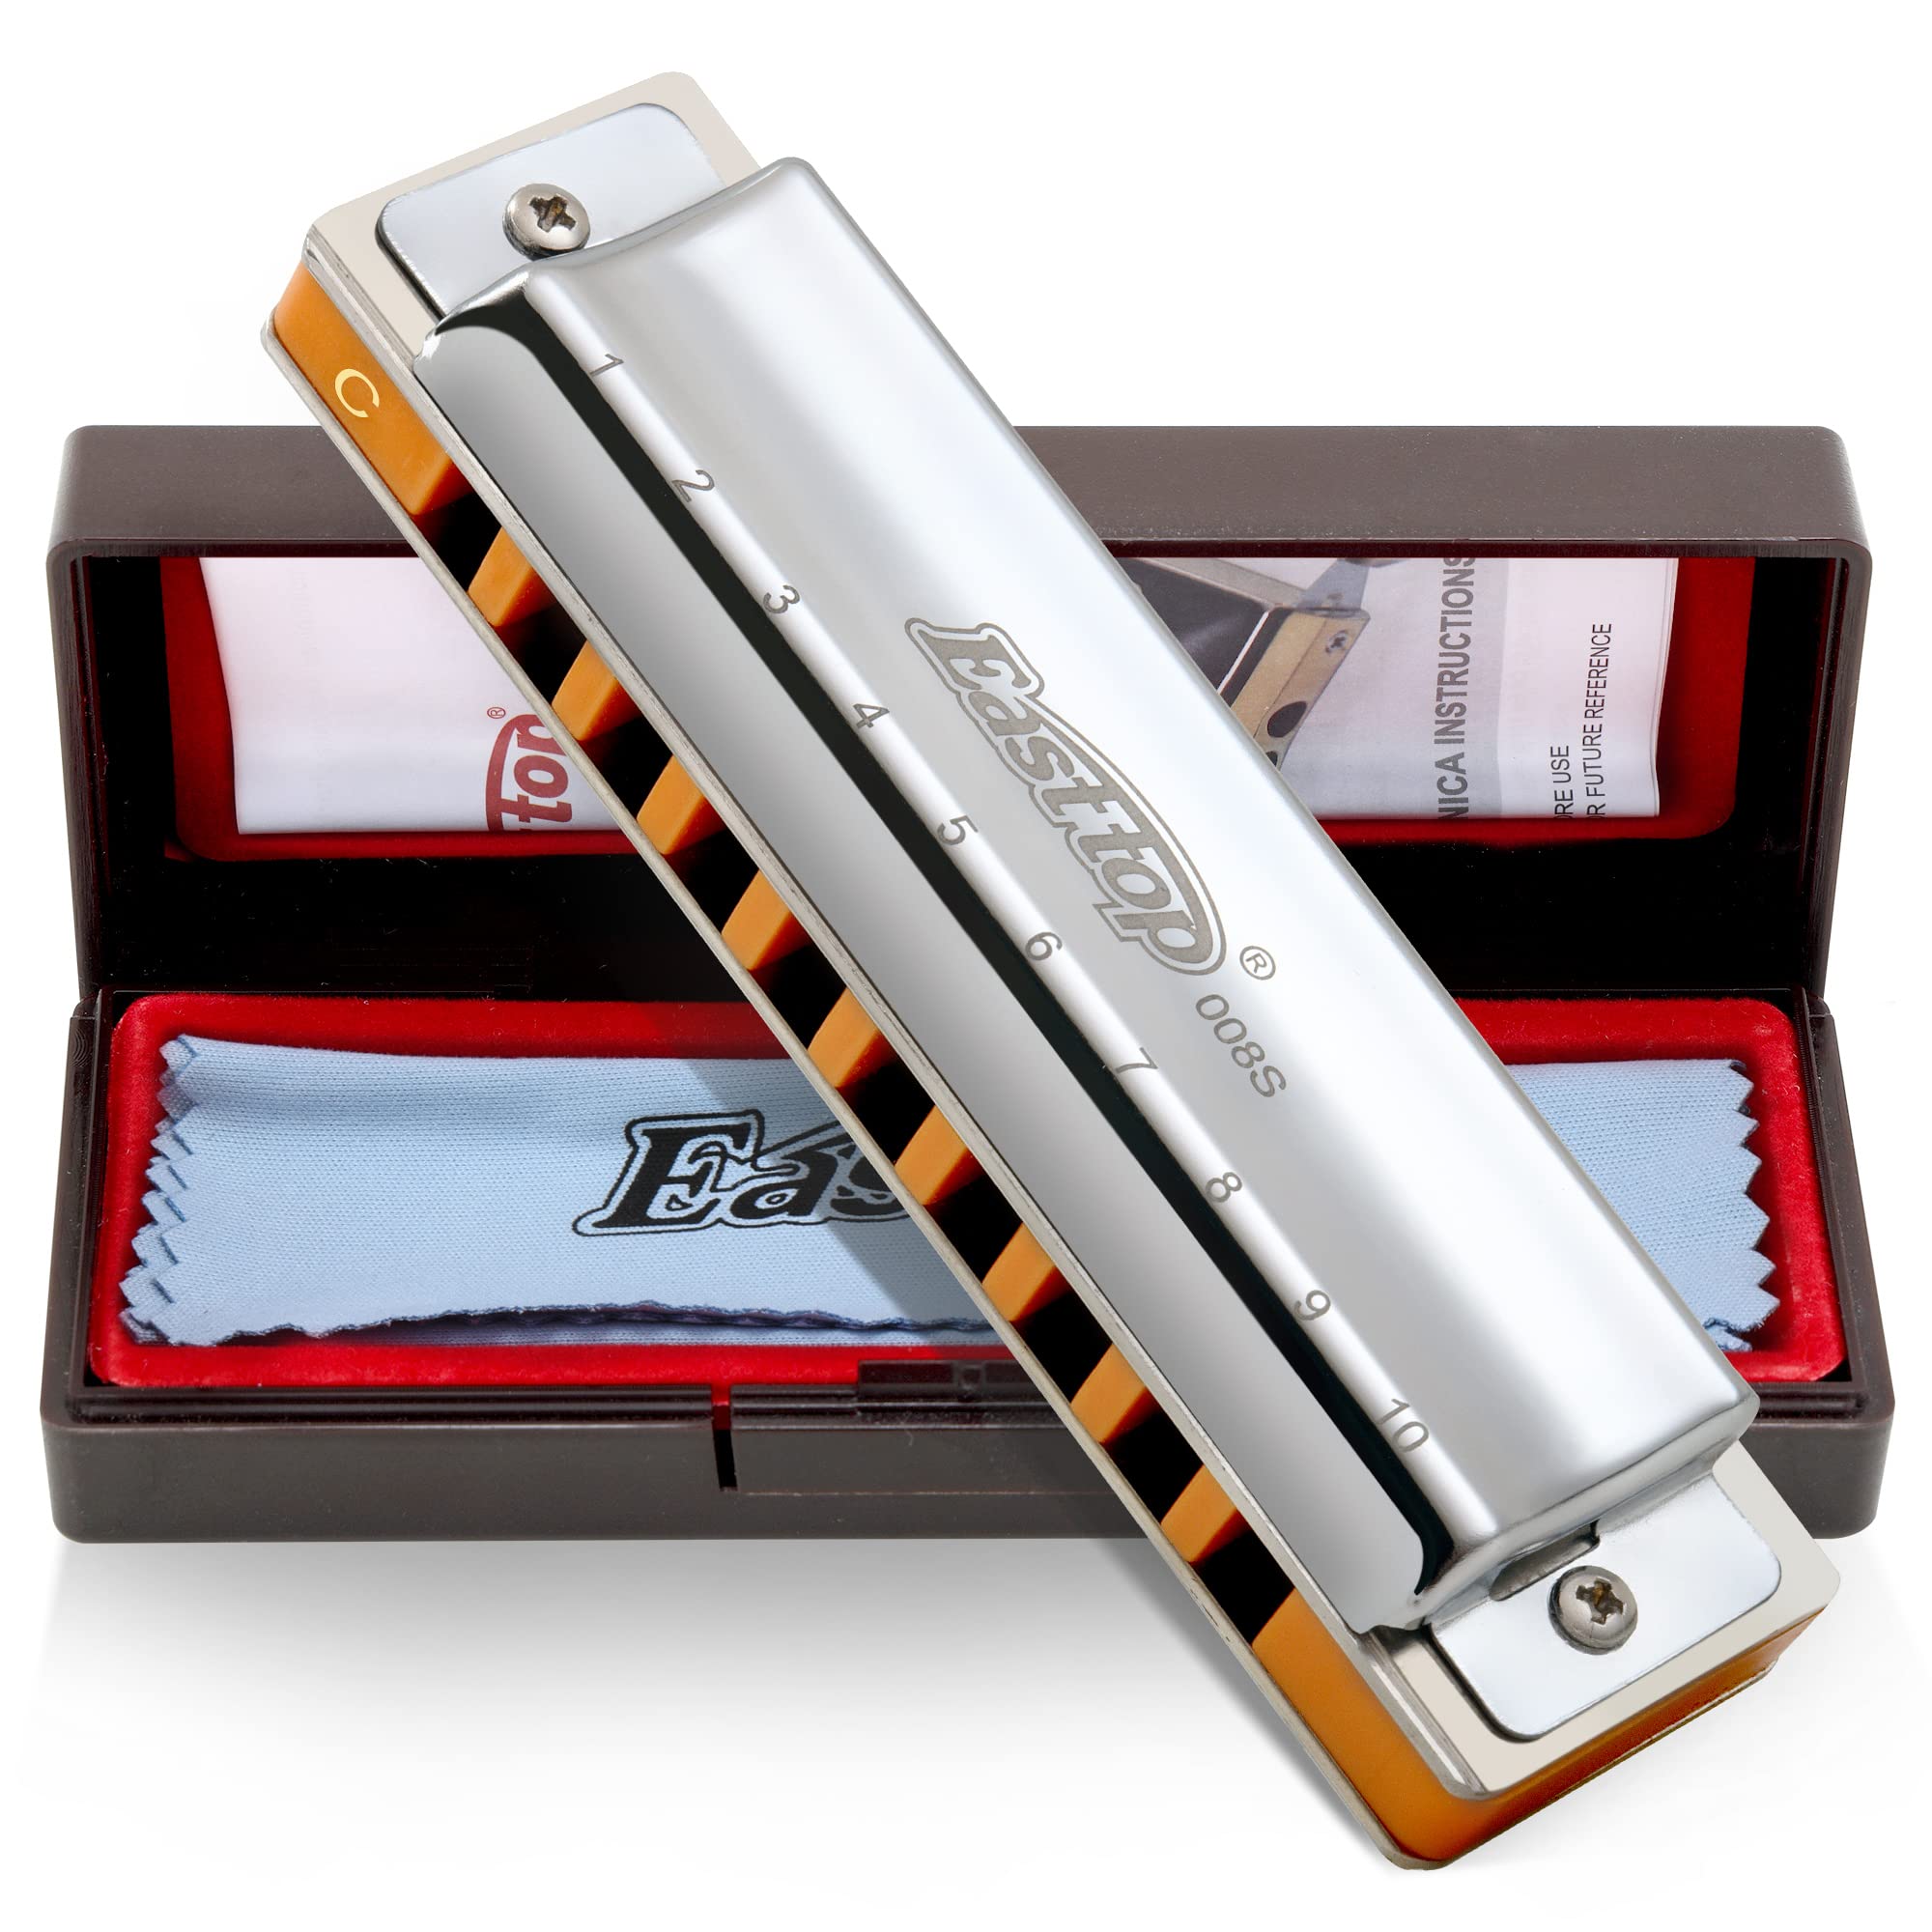 East top 10 Holes Professional Diatonic Blues Harmonica Key of A with Silver Cover, Probgrade Harmonicas For Adults, Professional Player and Students(T008S) - Easttop harmonica